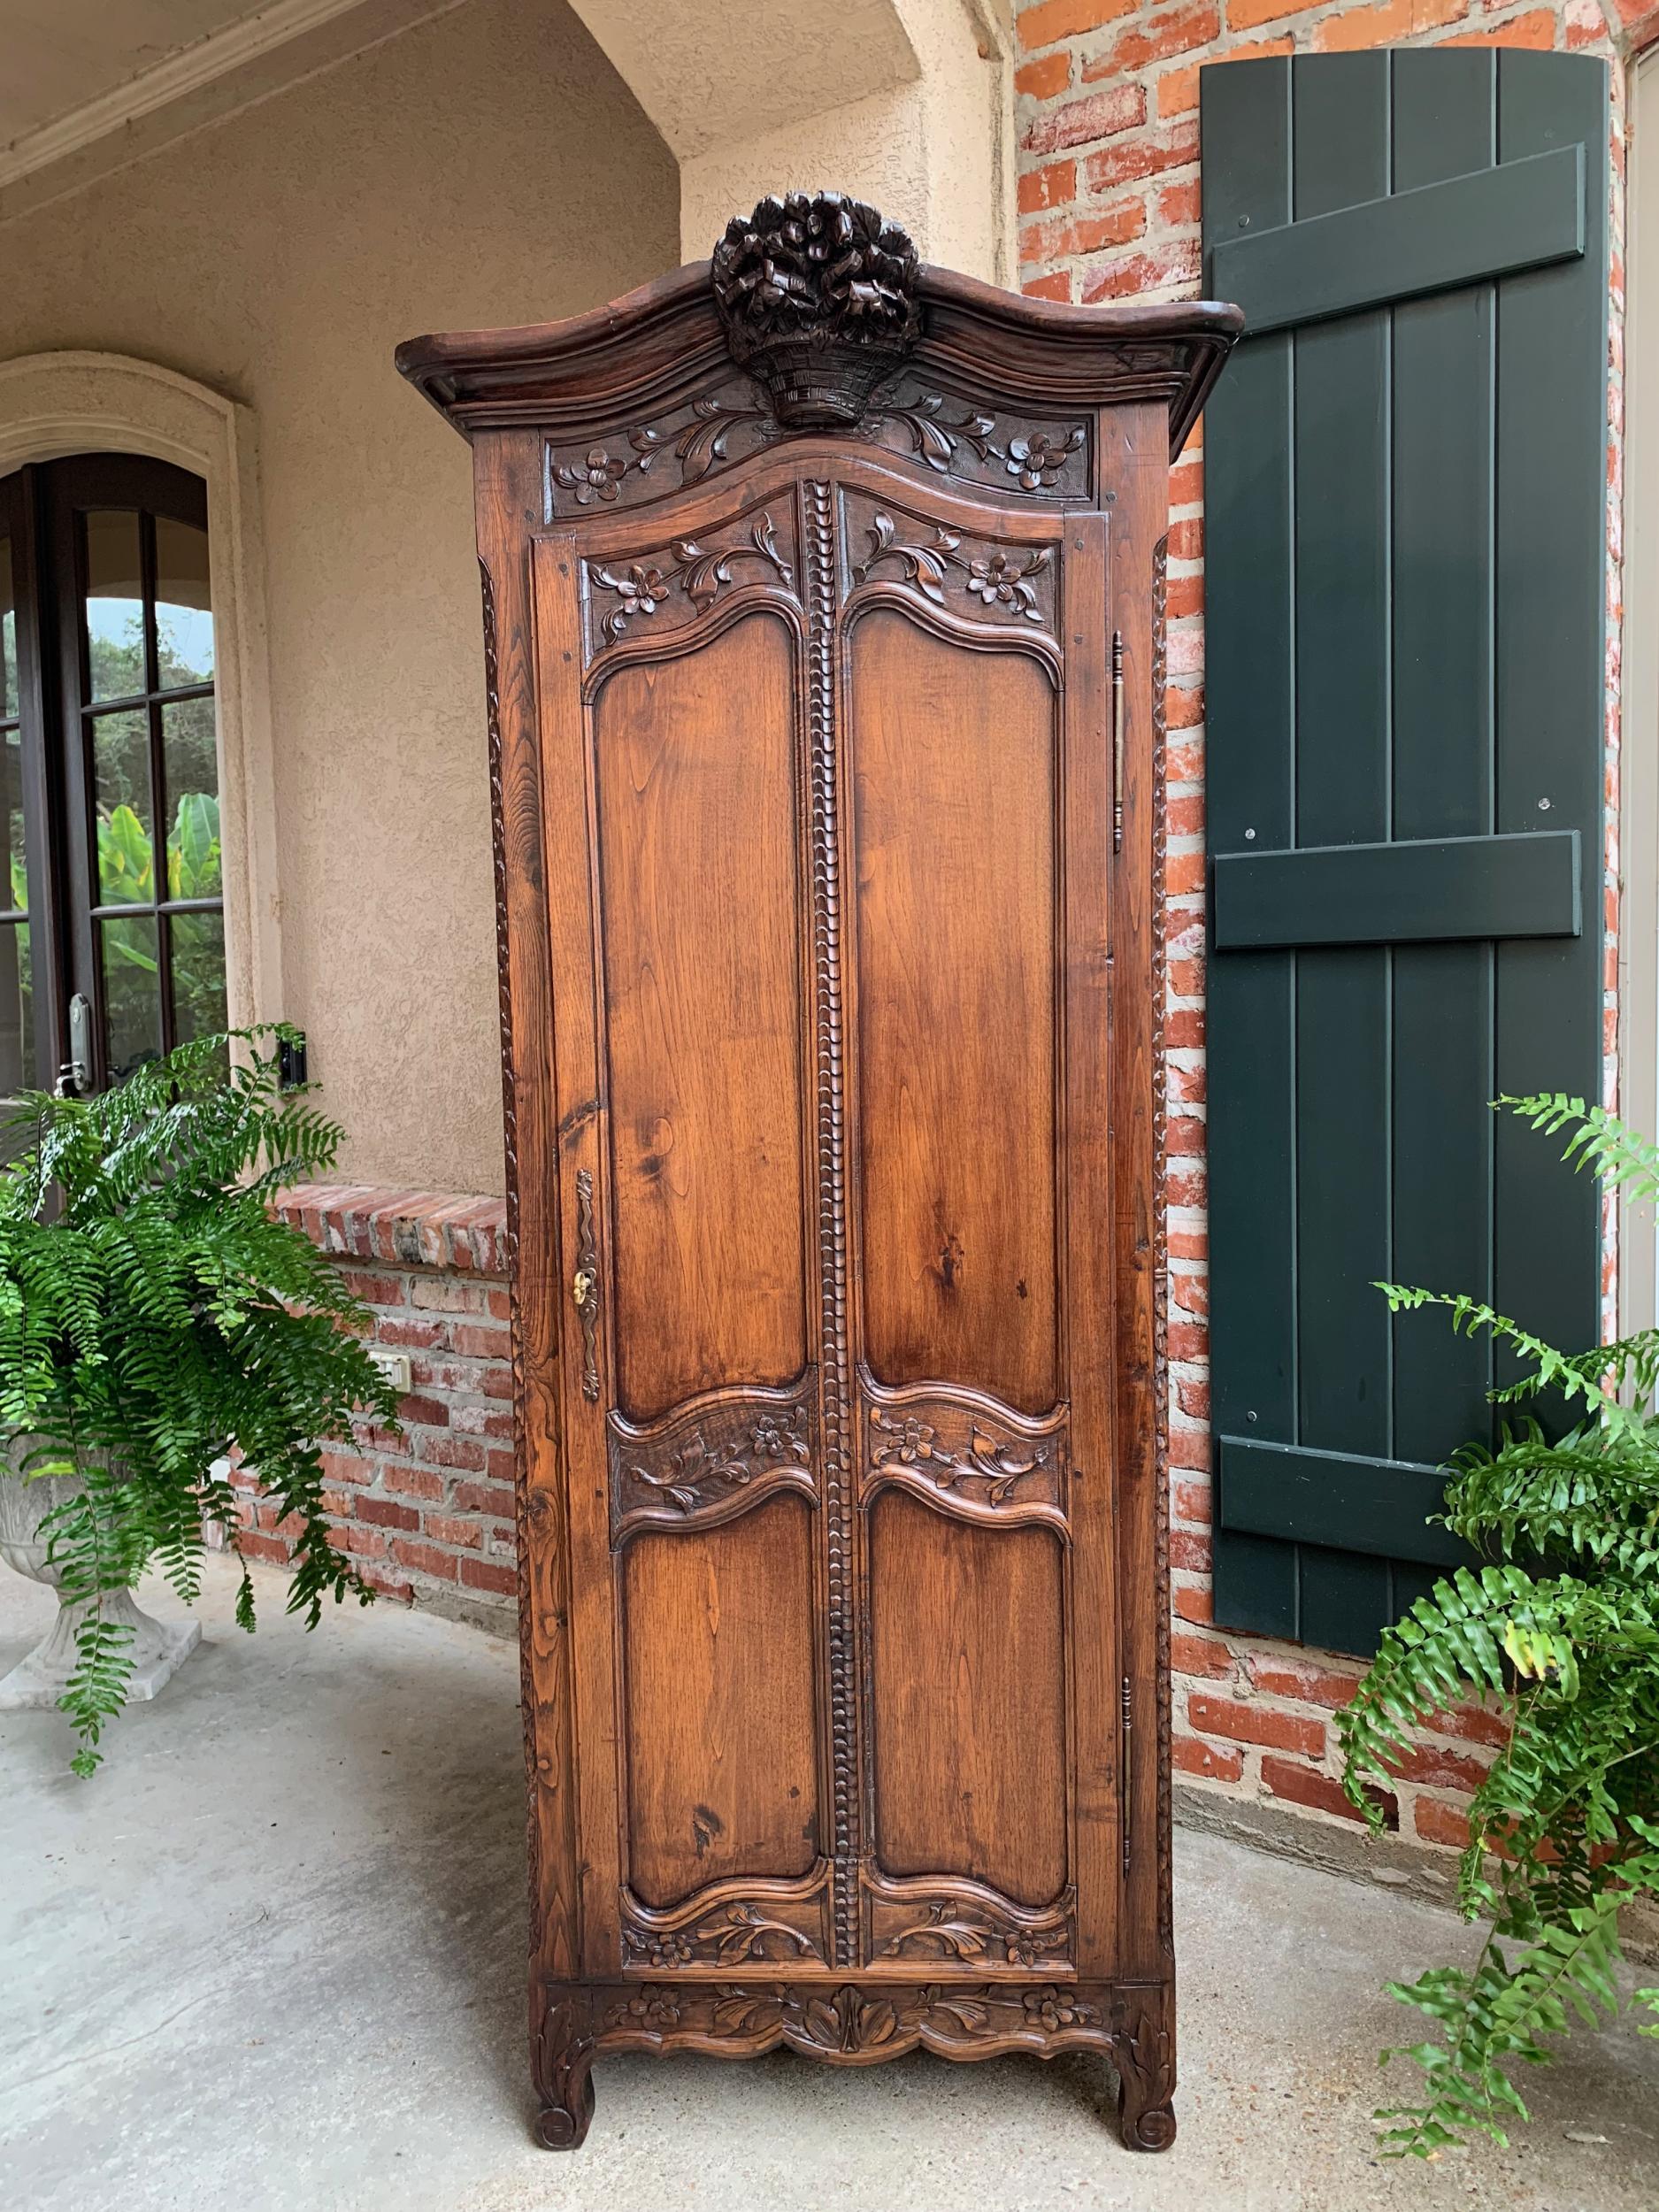 Antique French carved oak armoire bonnetiere linen cabinet Louis XV style 19th c

~Direct from France~
~Beautiful 19th century French carved armoire or “bonnetiere” cabinet, with gorgeous hand carvings throughout.~
~Quintessential French Louis